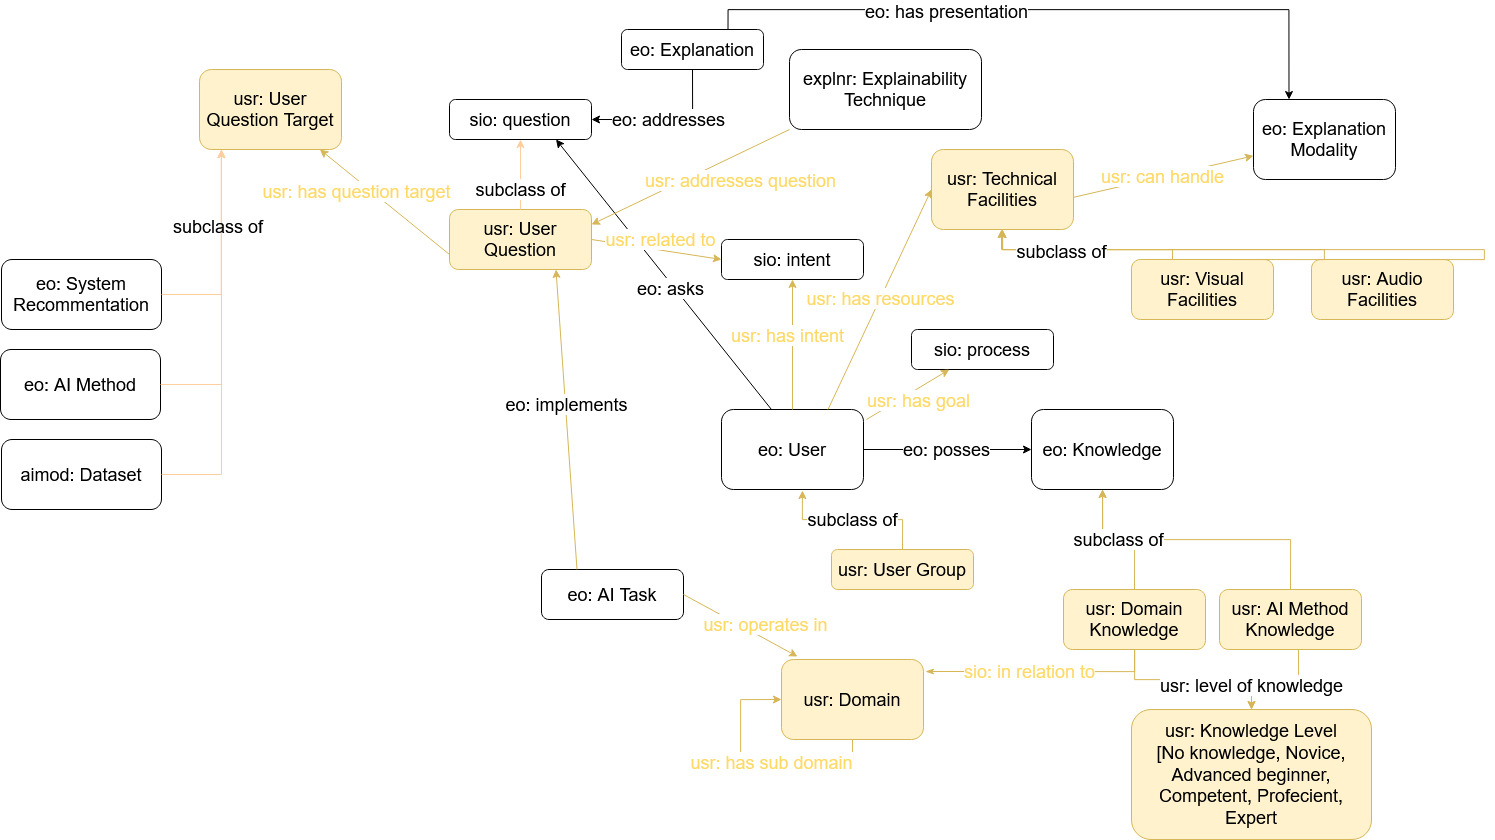 Outline of the User ontology main classes and relationships